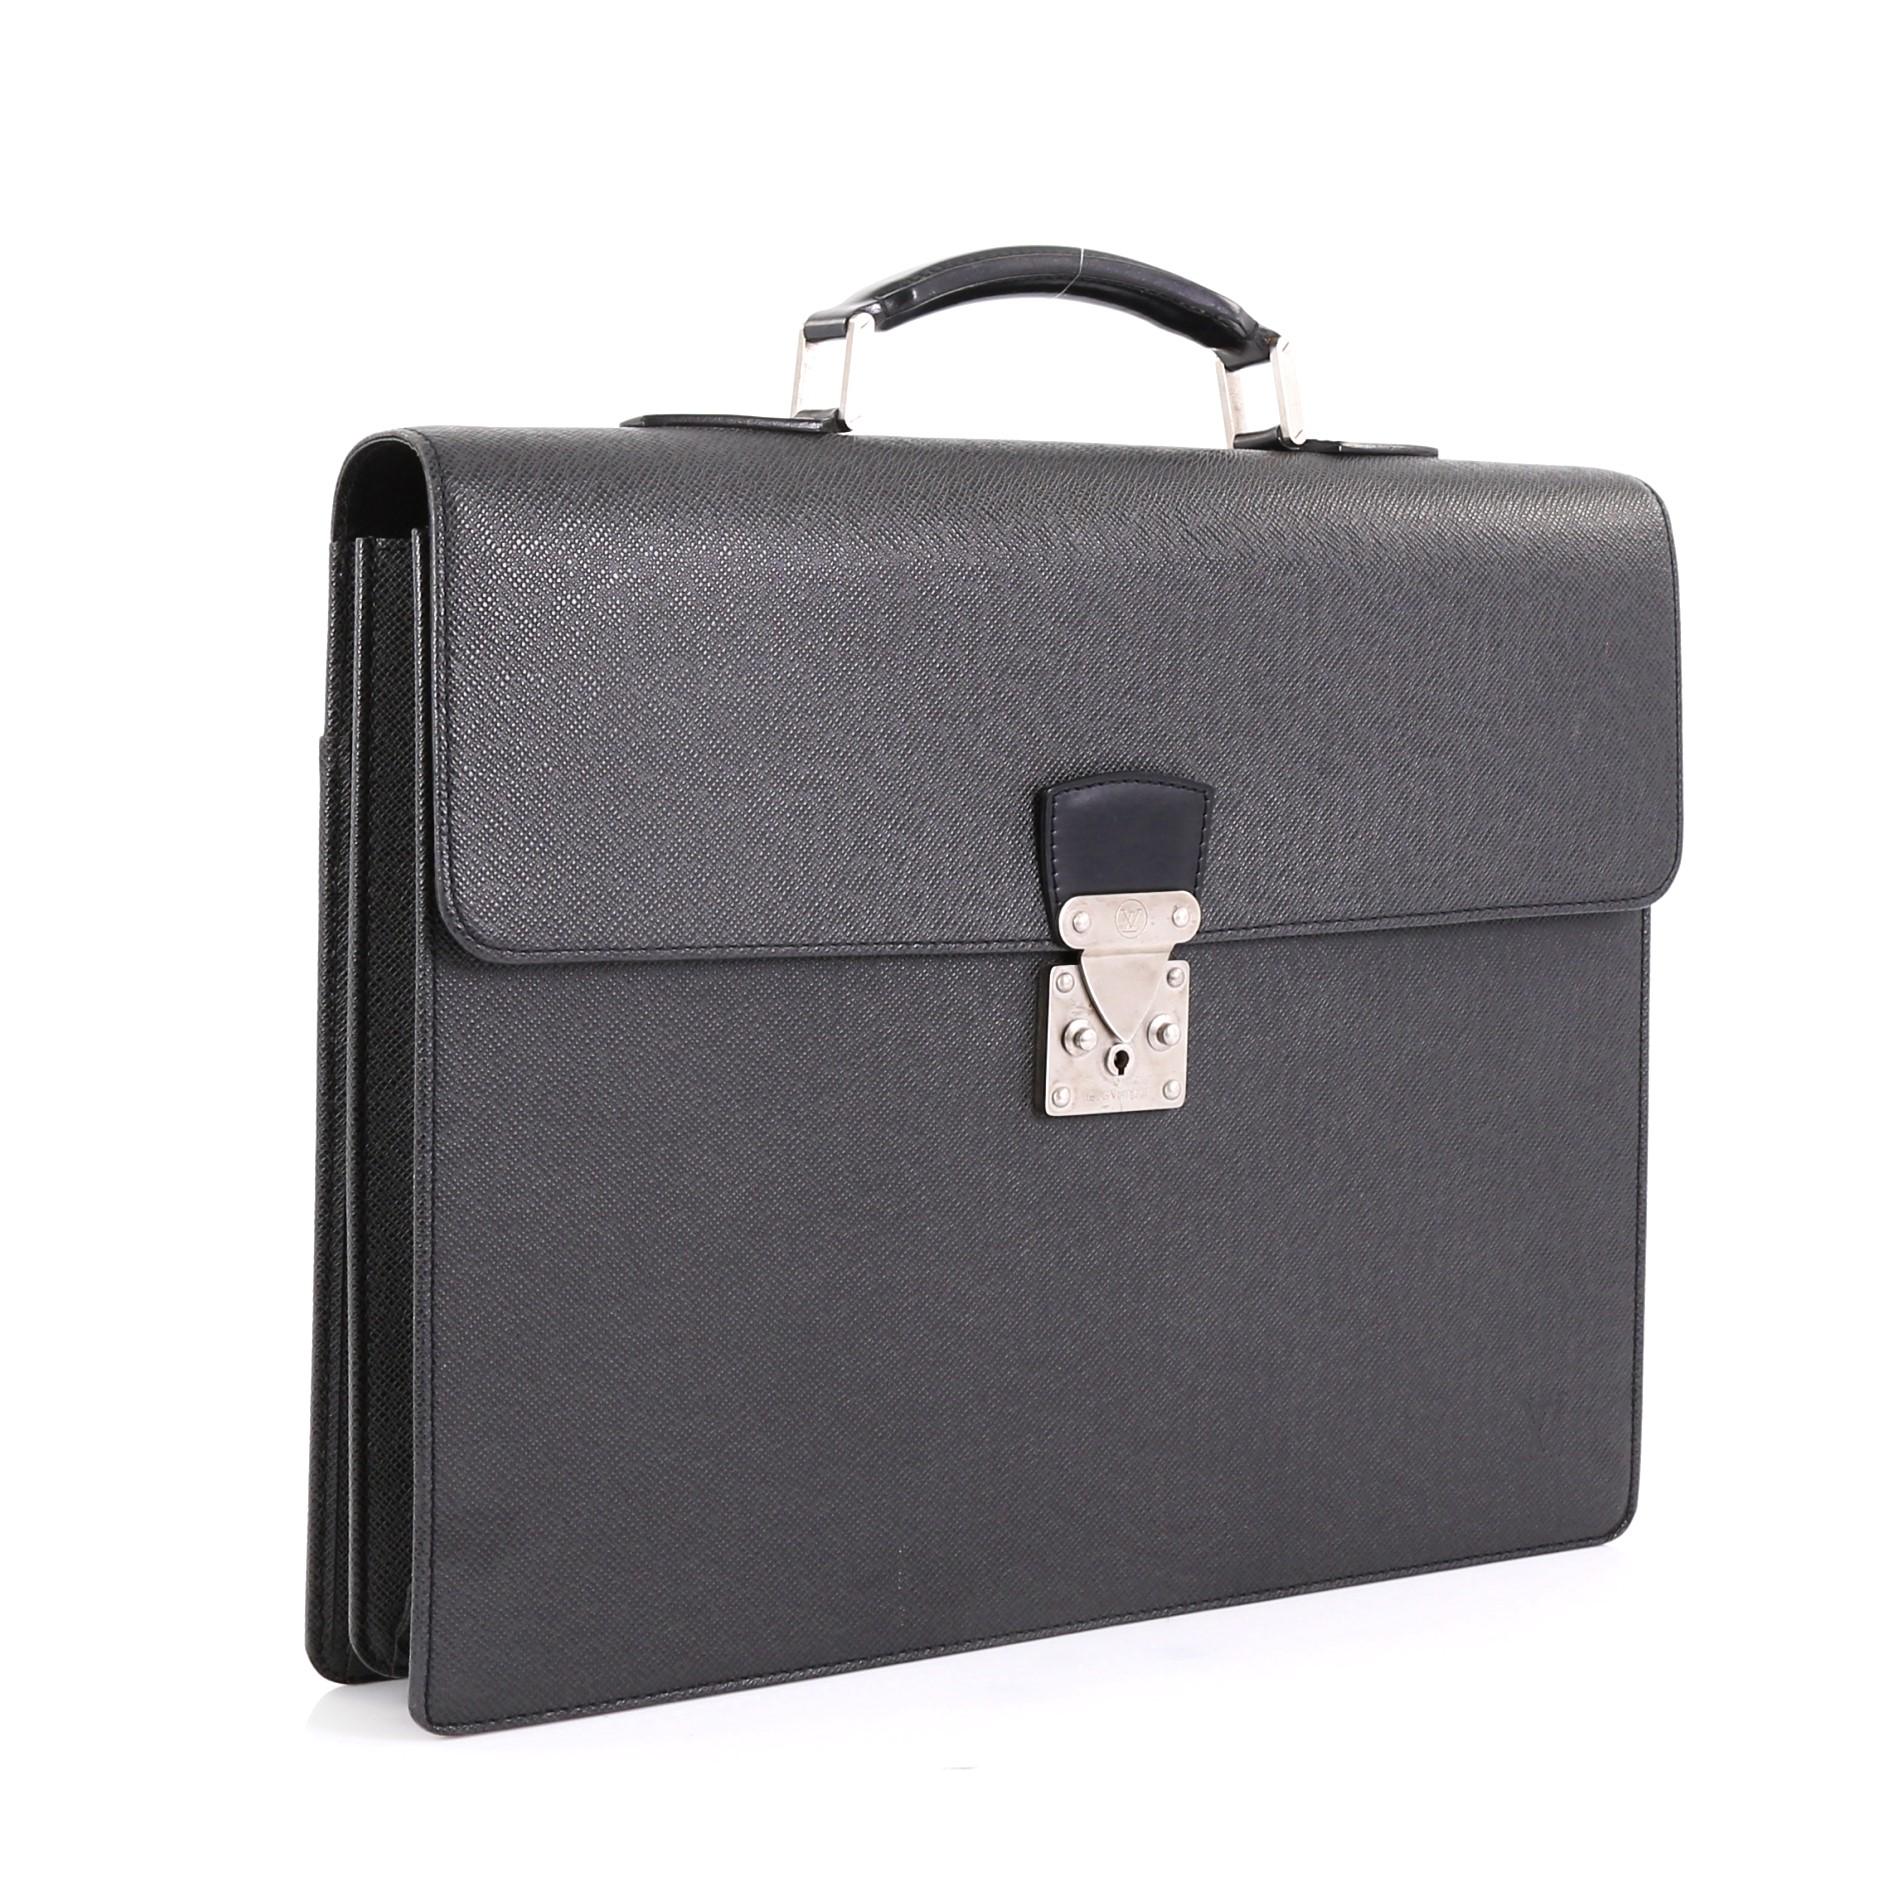 This Louis Vuitton Serviette Moskova Briefcase Taiga Leather, crafted in black taiga leather, features a flat top handle, exterior back flat pocket, and silver-tone hardware. Its S-lock closure opens to a black leather interior divided into two